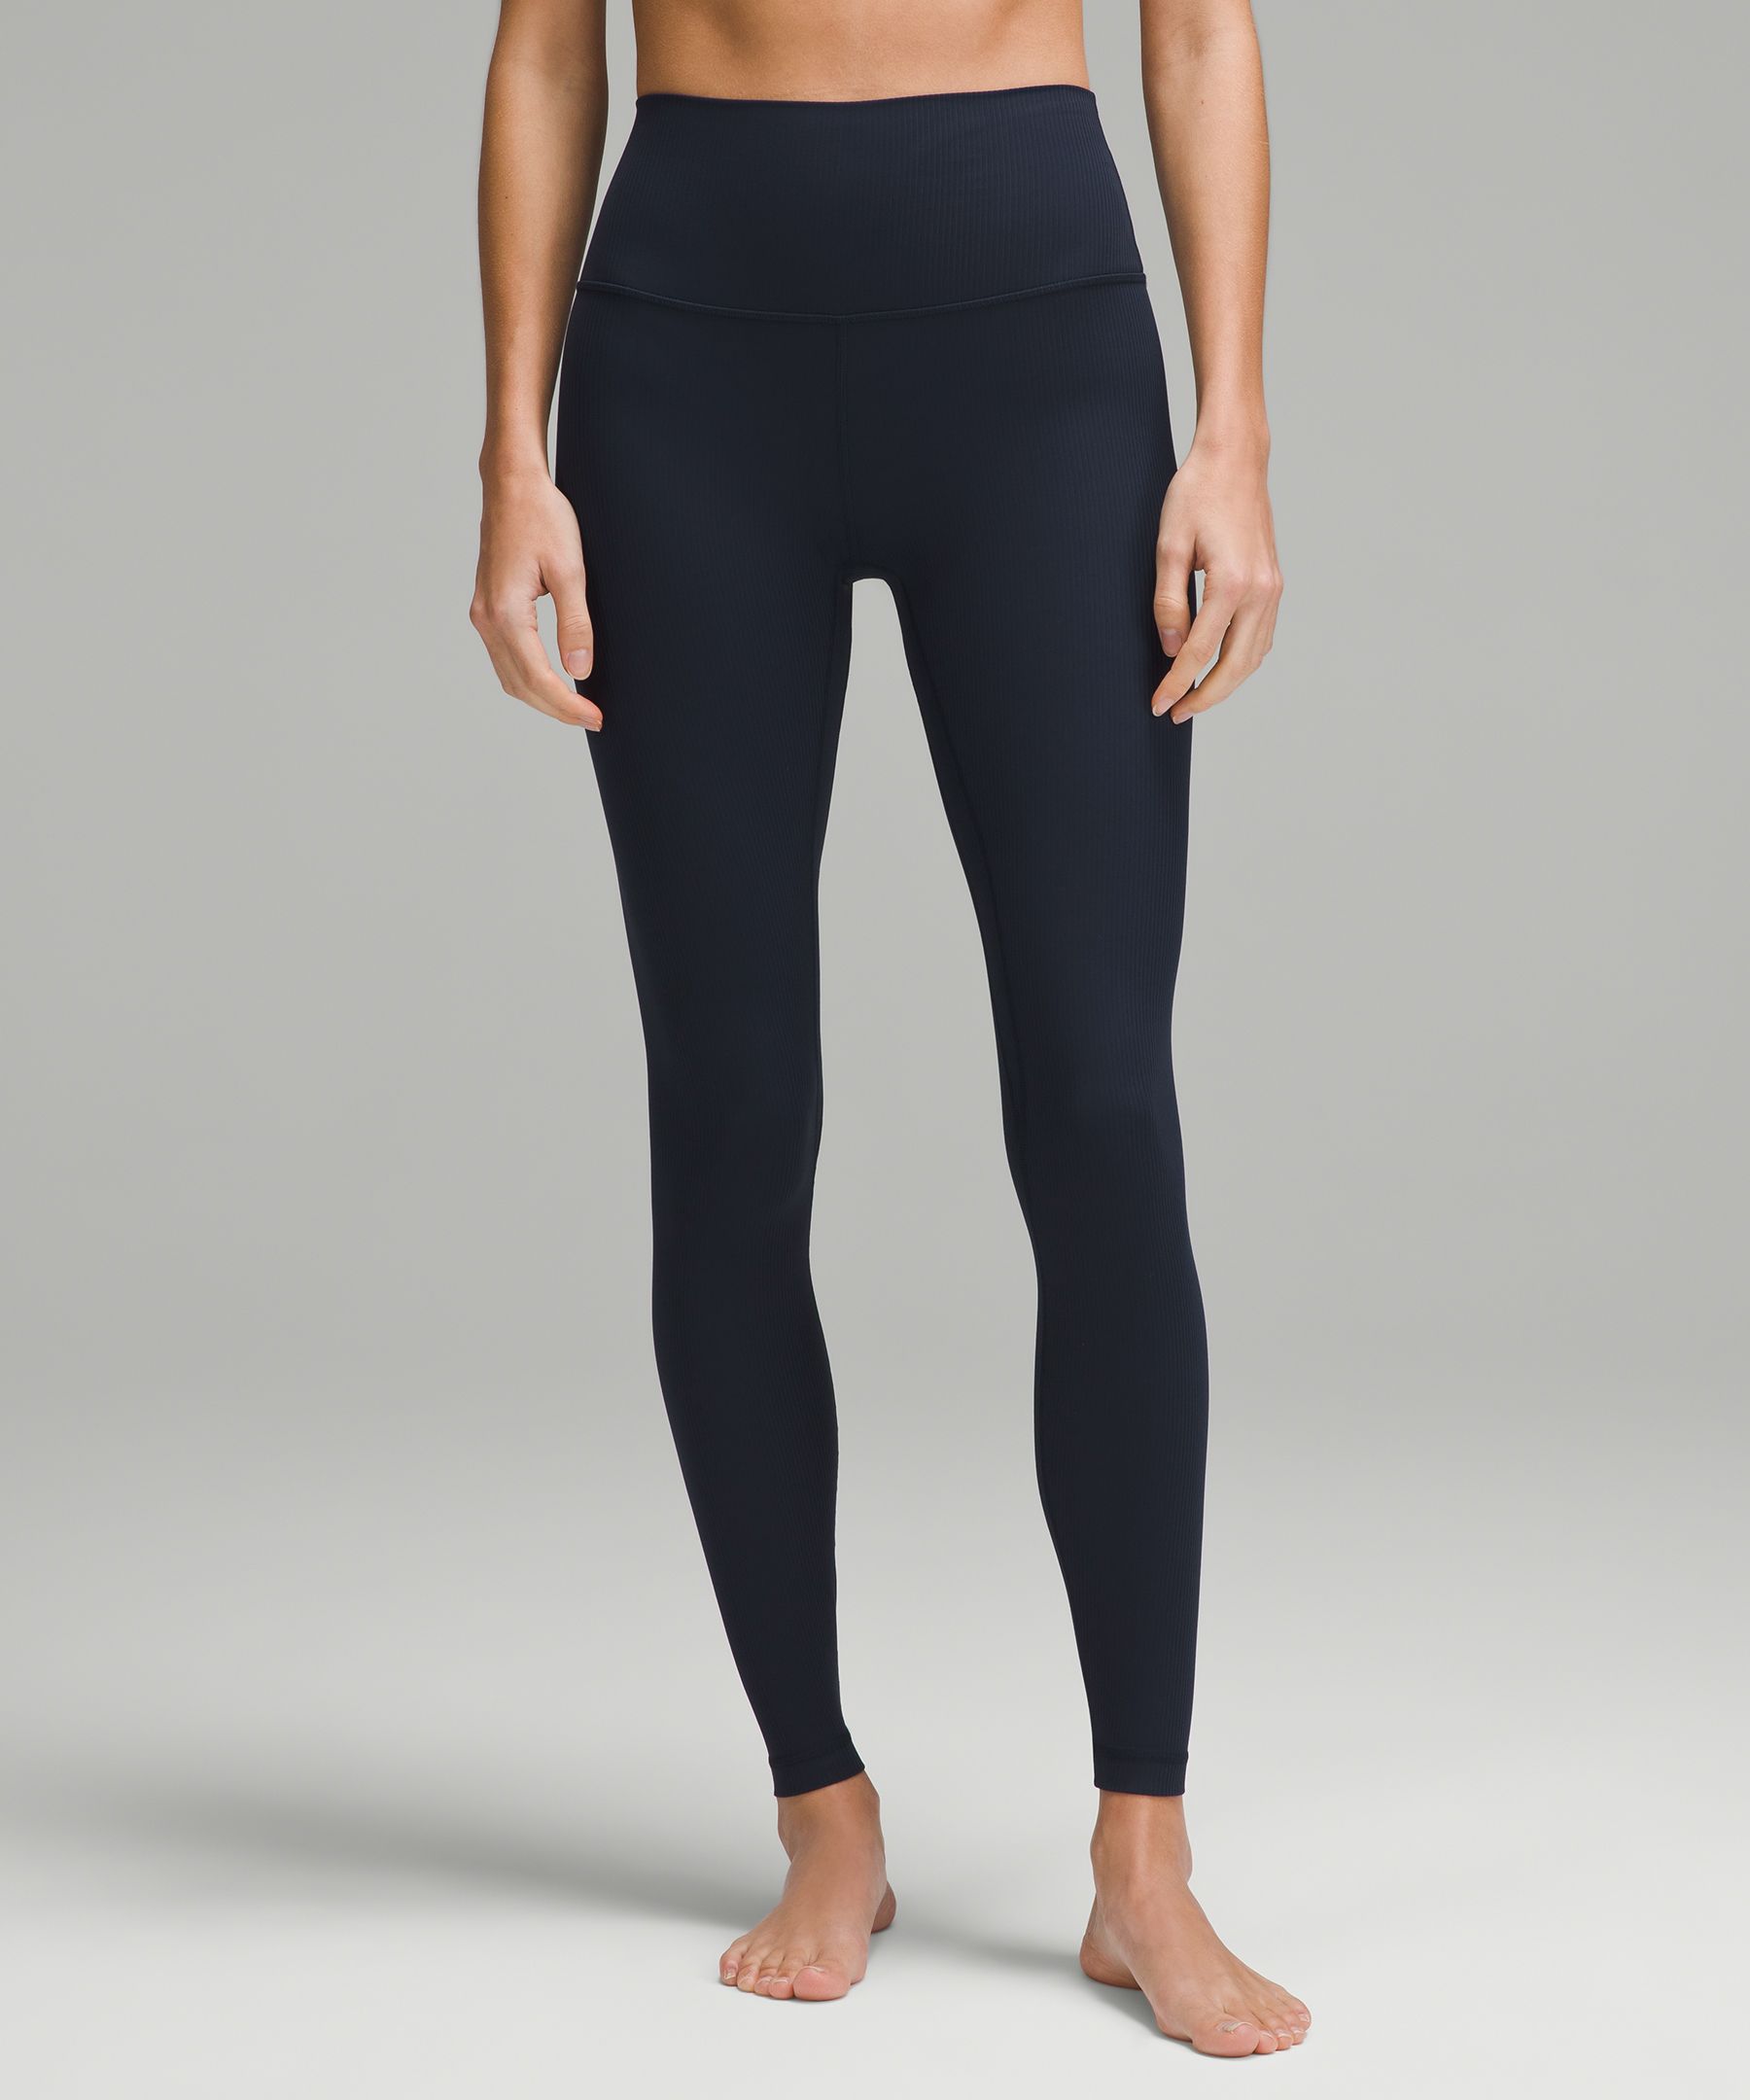 Lululemon Align™ High-rise Pants With Pockets 28 In Rainforest